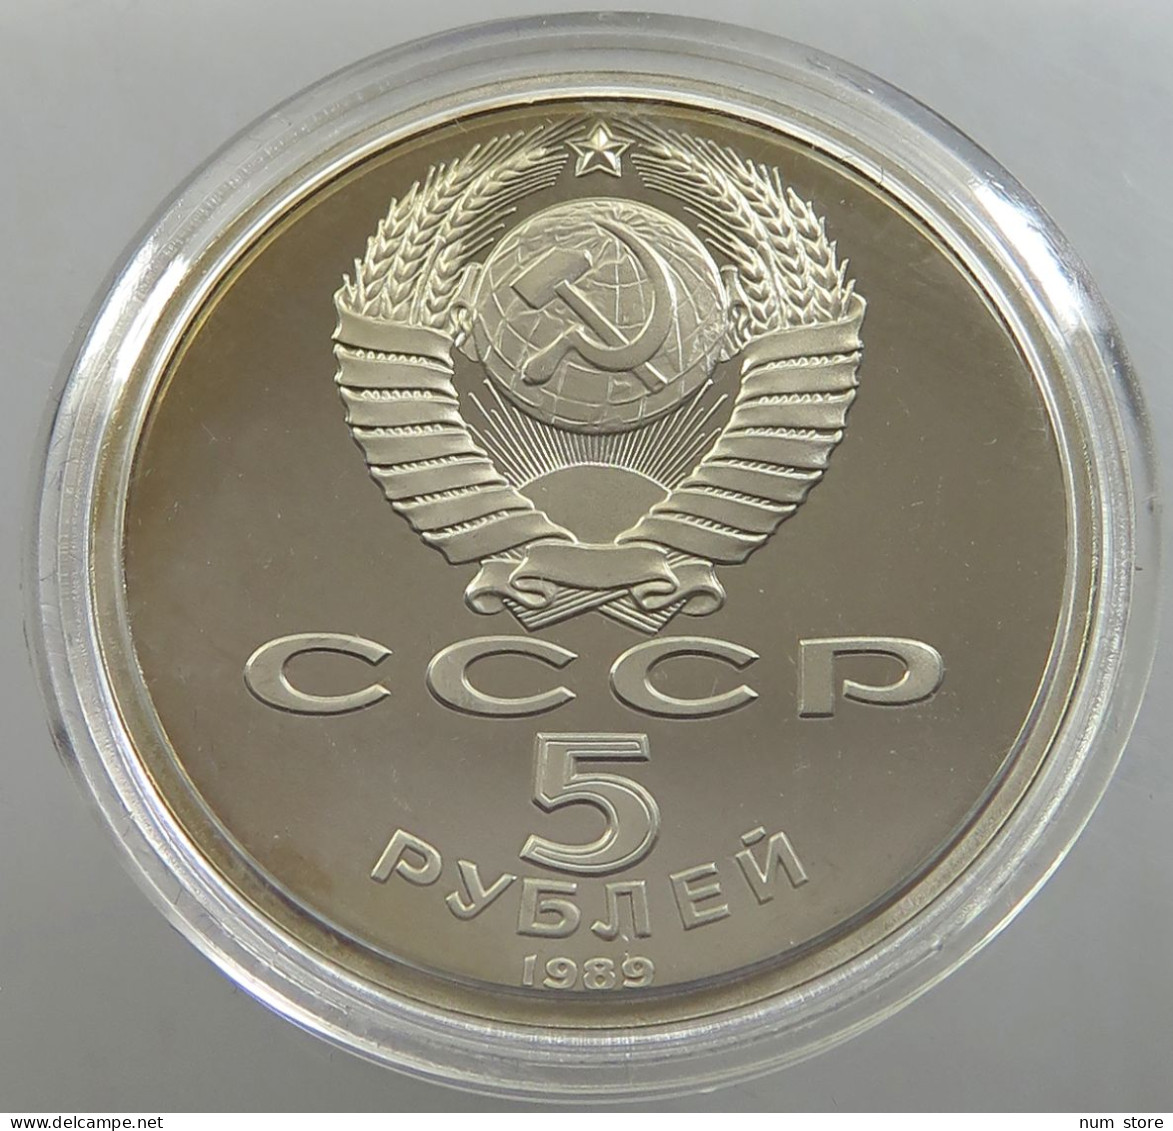 RUSSIA USSR 5 ROUBLES 1989 PROOF #sm14 0435 - Russland